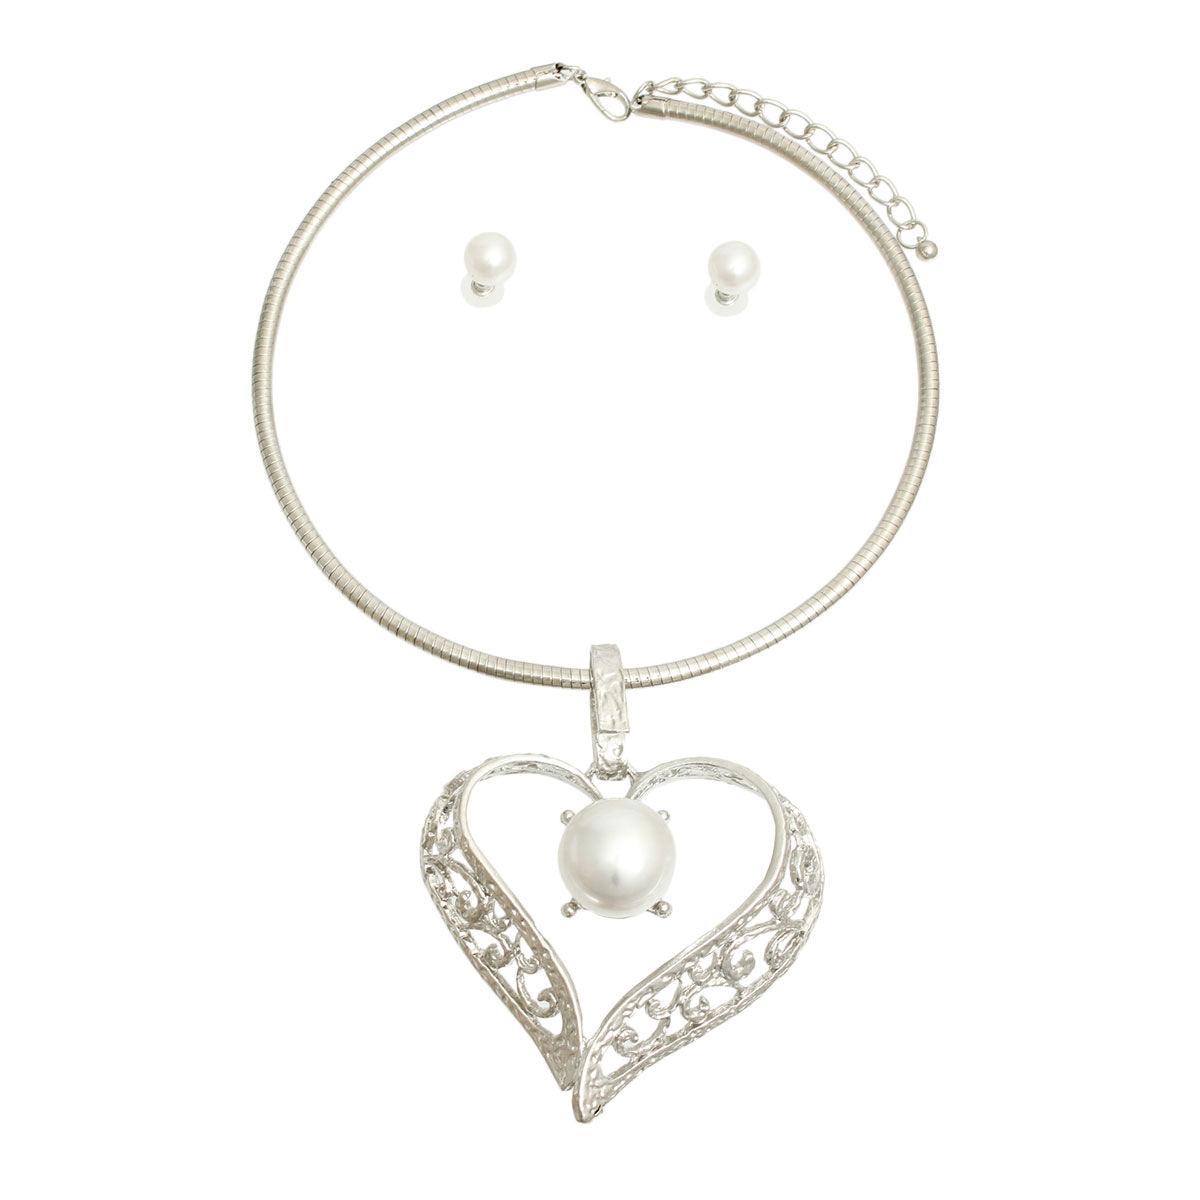 Modernist Open Heart Necklace Set Silver Plated